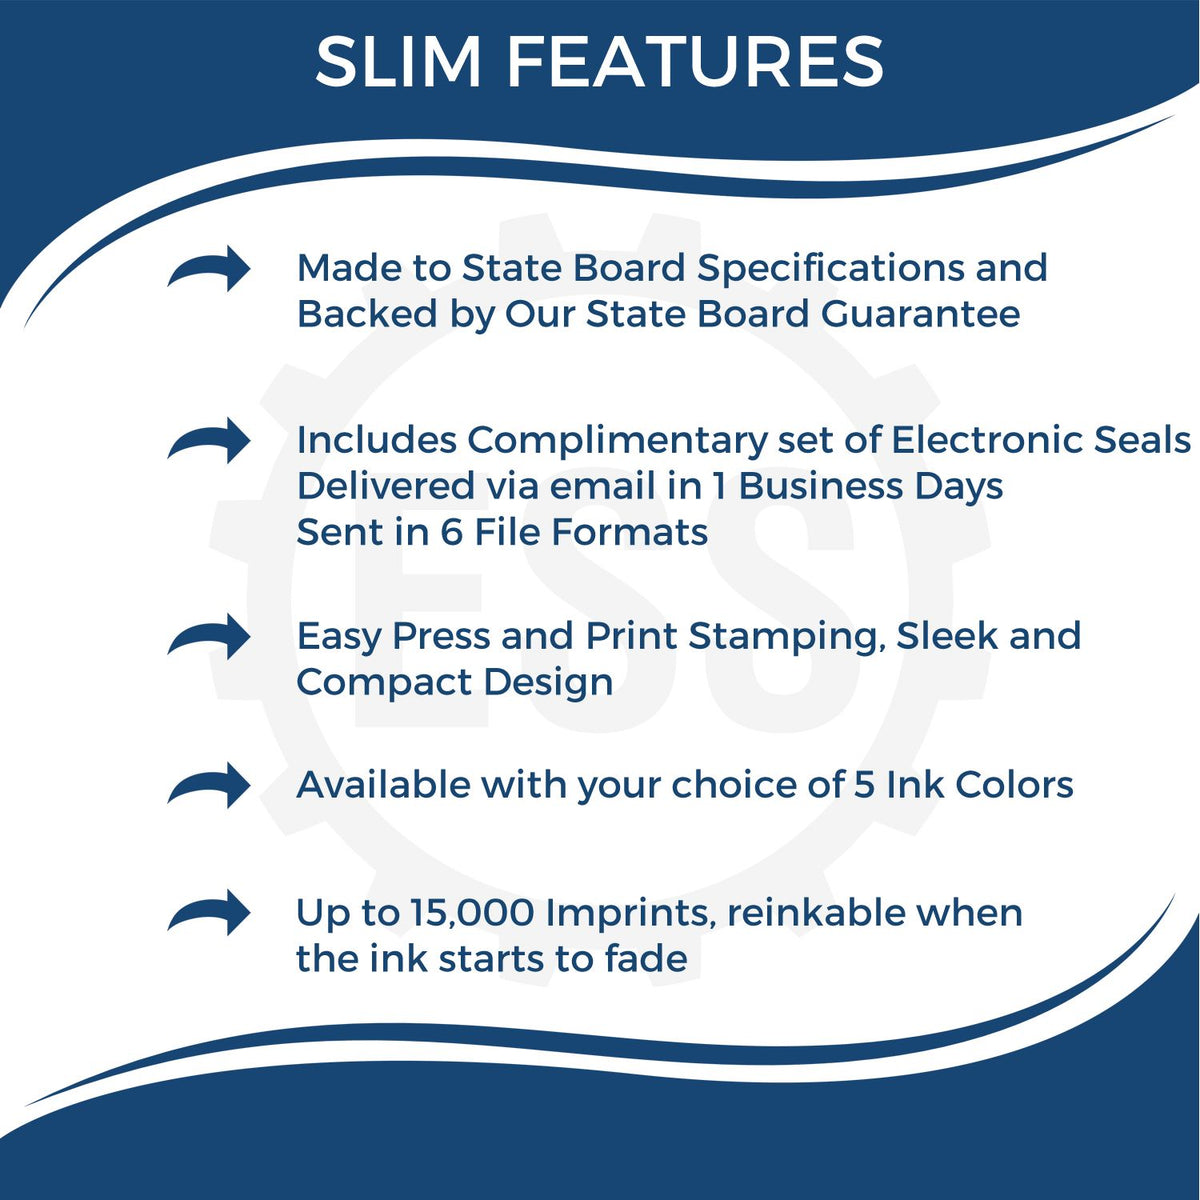 A picture of an infographic highlighting the selling points for the Super Slim Iowa Notary Public Stamp